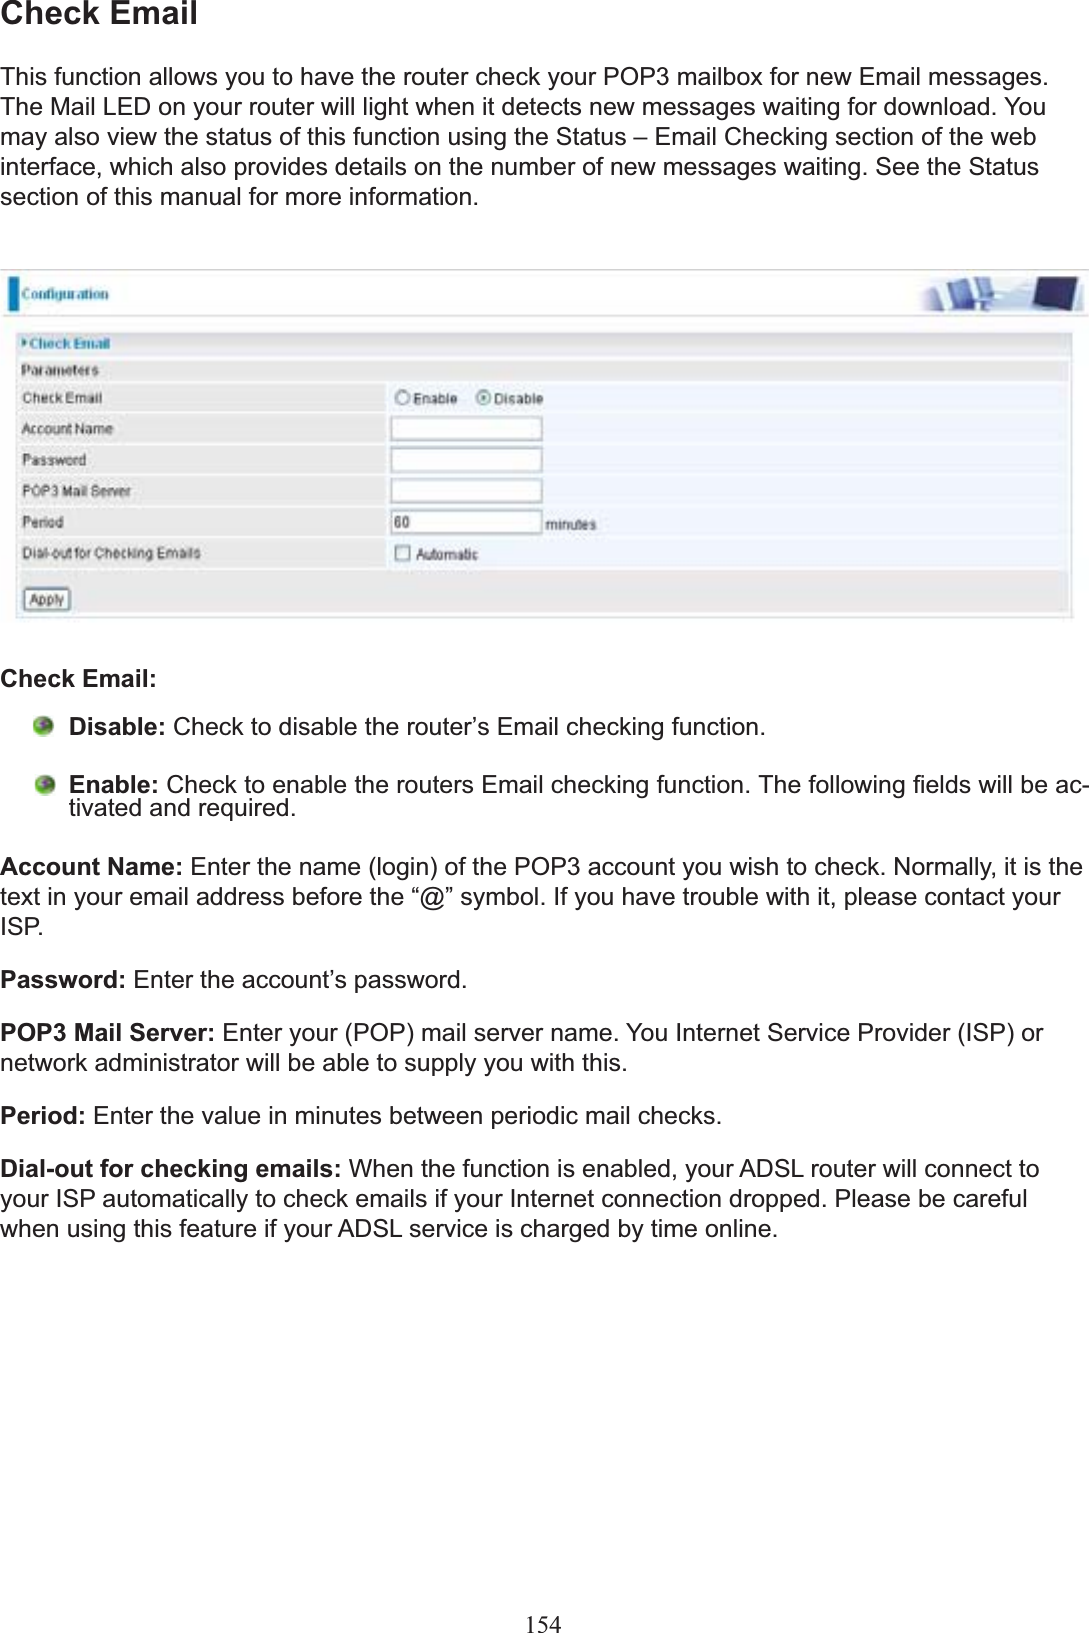 154Check EmailThis function allows you to have the router check your POP3 mailbox for new Email messages. 7KH0DLO/(&apos;RQ\RXUURXWHUZLOOOLJKWZKHQLWGHWHFWVQHZPHVVDJHVZDLWLQJIRUGRZQORDG&lt;RXmay also view the status of this function using the Status – Email Checking section of the web interface, which also provides details on the number of new messages waiting. See the Status section of this manual for more information.Check Email: Disable: &amp;KHFNWRGLVDEOHWKHURXWHU¶V(PDLOFKHFNLQJIXQFWLRQEnable: &amp;KHFNWRHQDEOHWKHURXWHUV(PDLOFKHFNLQJIXQFWLRQ7KHIROORZLQJ¿HOGVZLOOEHDF-WLYDWHGDQGUHTXLUHGAccount Name: Enter the name (login) of the POP3 account you wish to check. Normally, it is the WH[WLQ\RXUHPDLODGGUHVVEHIRUHWKH³#´V\PERO,I\RXKDYHWURXEOHZLWKLWSOHDVHFRQWDFW\RXUISP.Password: (QWHUWKHDFFRXQW¶VSDVVZRUGPOP3 Mail Server: Enter your (POP) mail server name. You Internet Service Provider (ISP) or network administrator will be able to supply you with this.Period: Enter the value in minutes between periodic mail checks.Dial-out for checking emails: :KHQWKHIXQFWLRQLVHQDEOHG\RXU$&apos;6/URXWHUZLOOFRQQHFWWRyour ISP automatically to check emails if your Internet connection dropped. Please be careful when using this feature if your ADSL service is charged by time online.